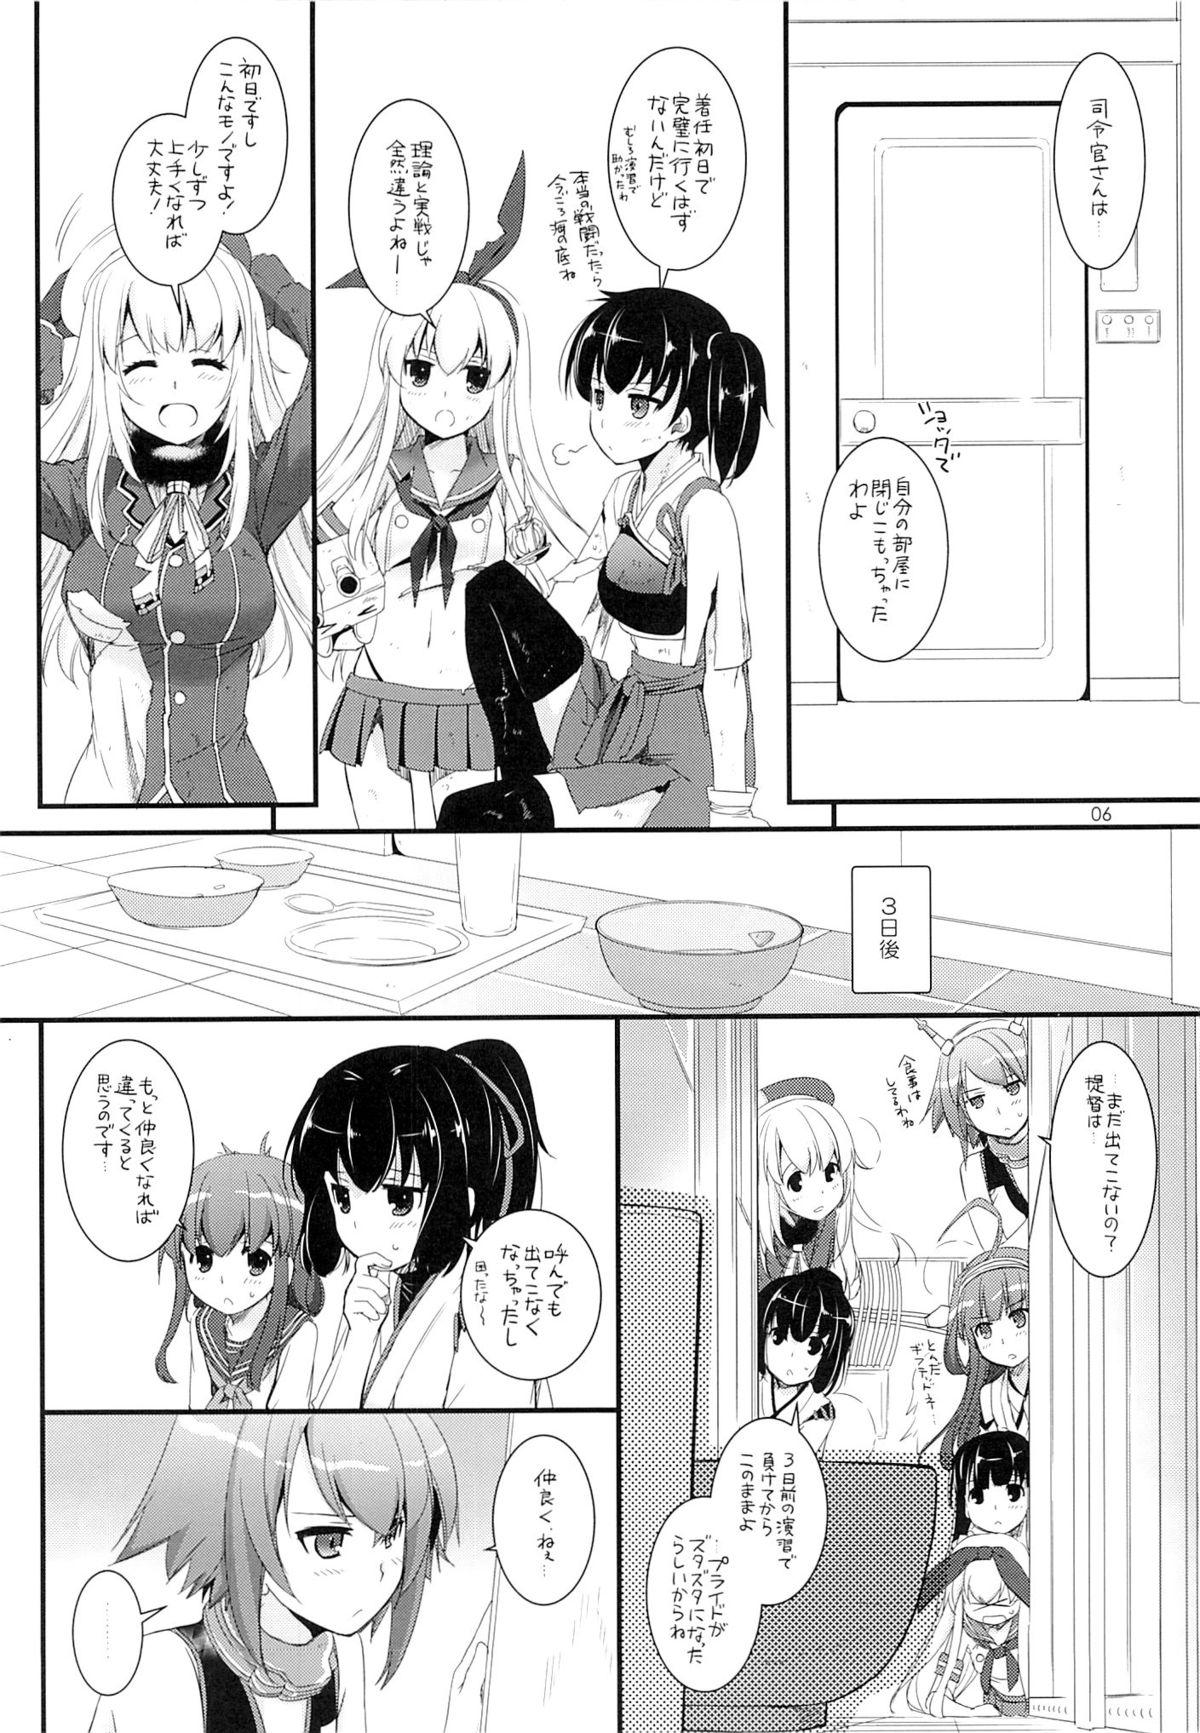 Mexicano D.L. action 81 - Kantai collection Suckingcock - Page 5